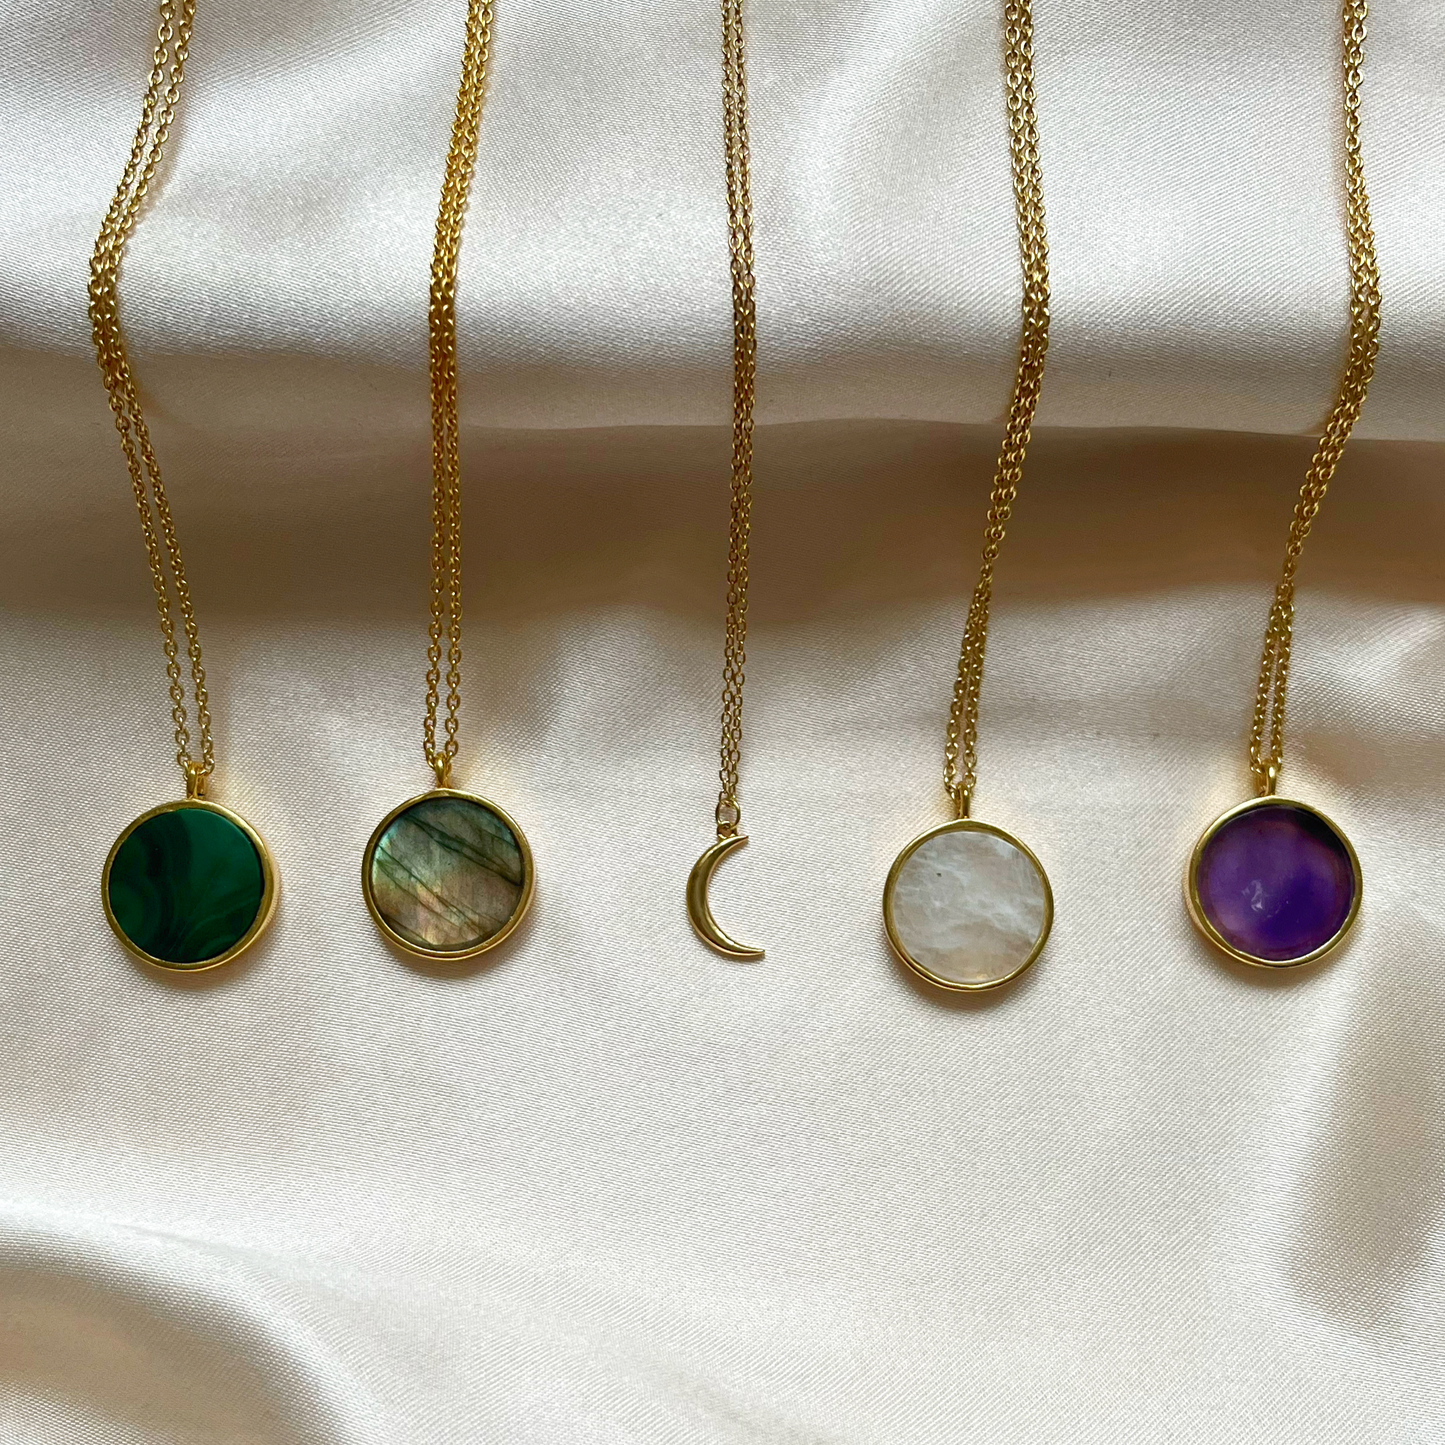 Mini Moon necklace and Gemstone coin necklaces in Malachite, Labradorite, Moonstone and Amethyst